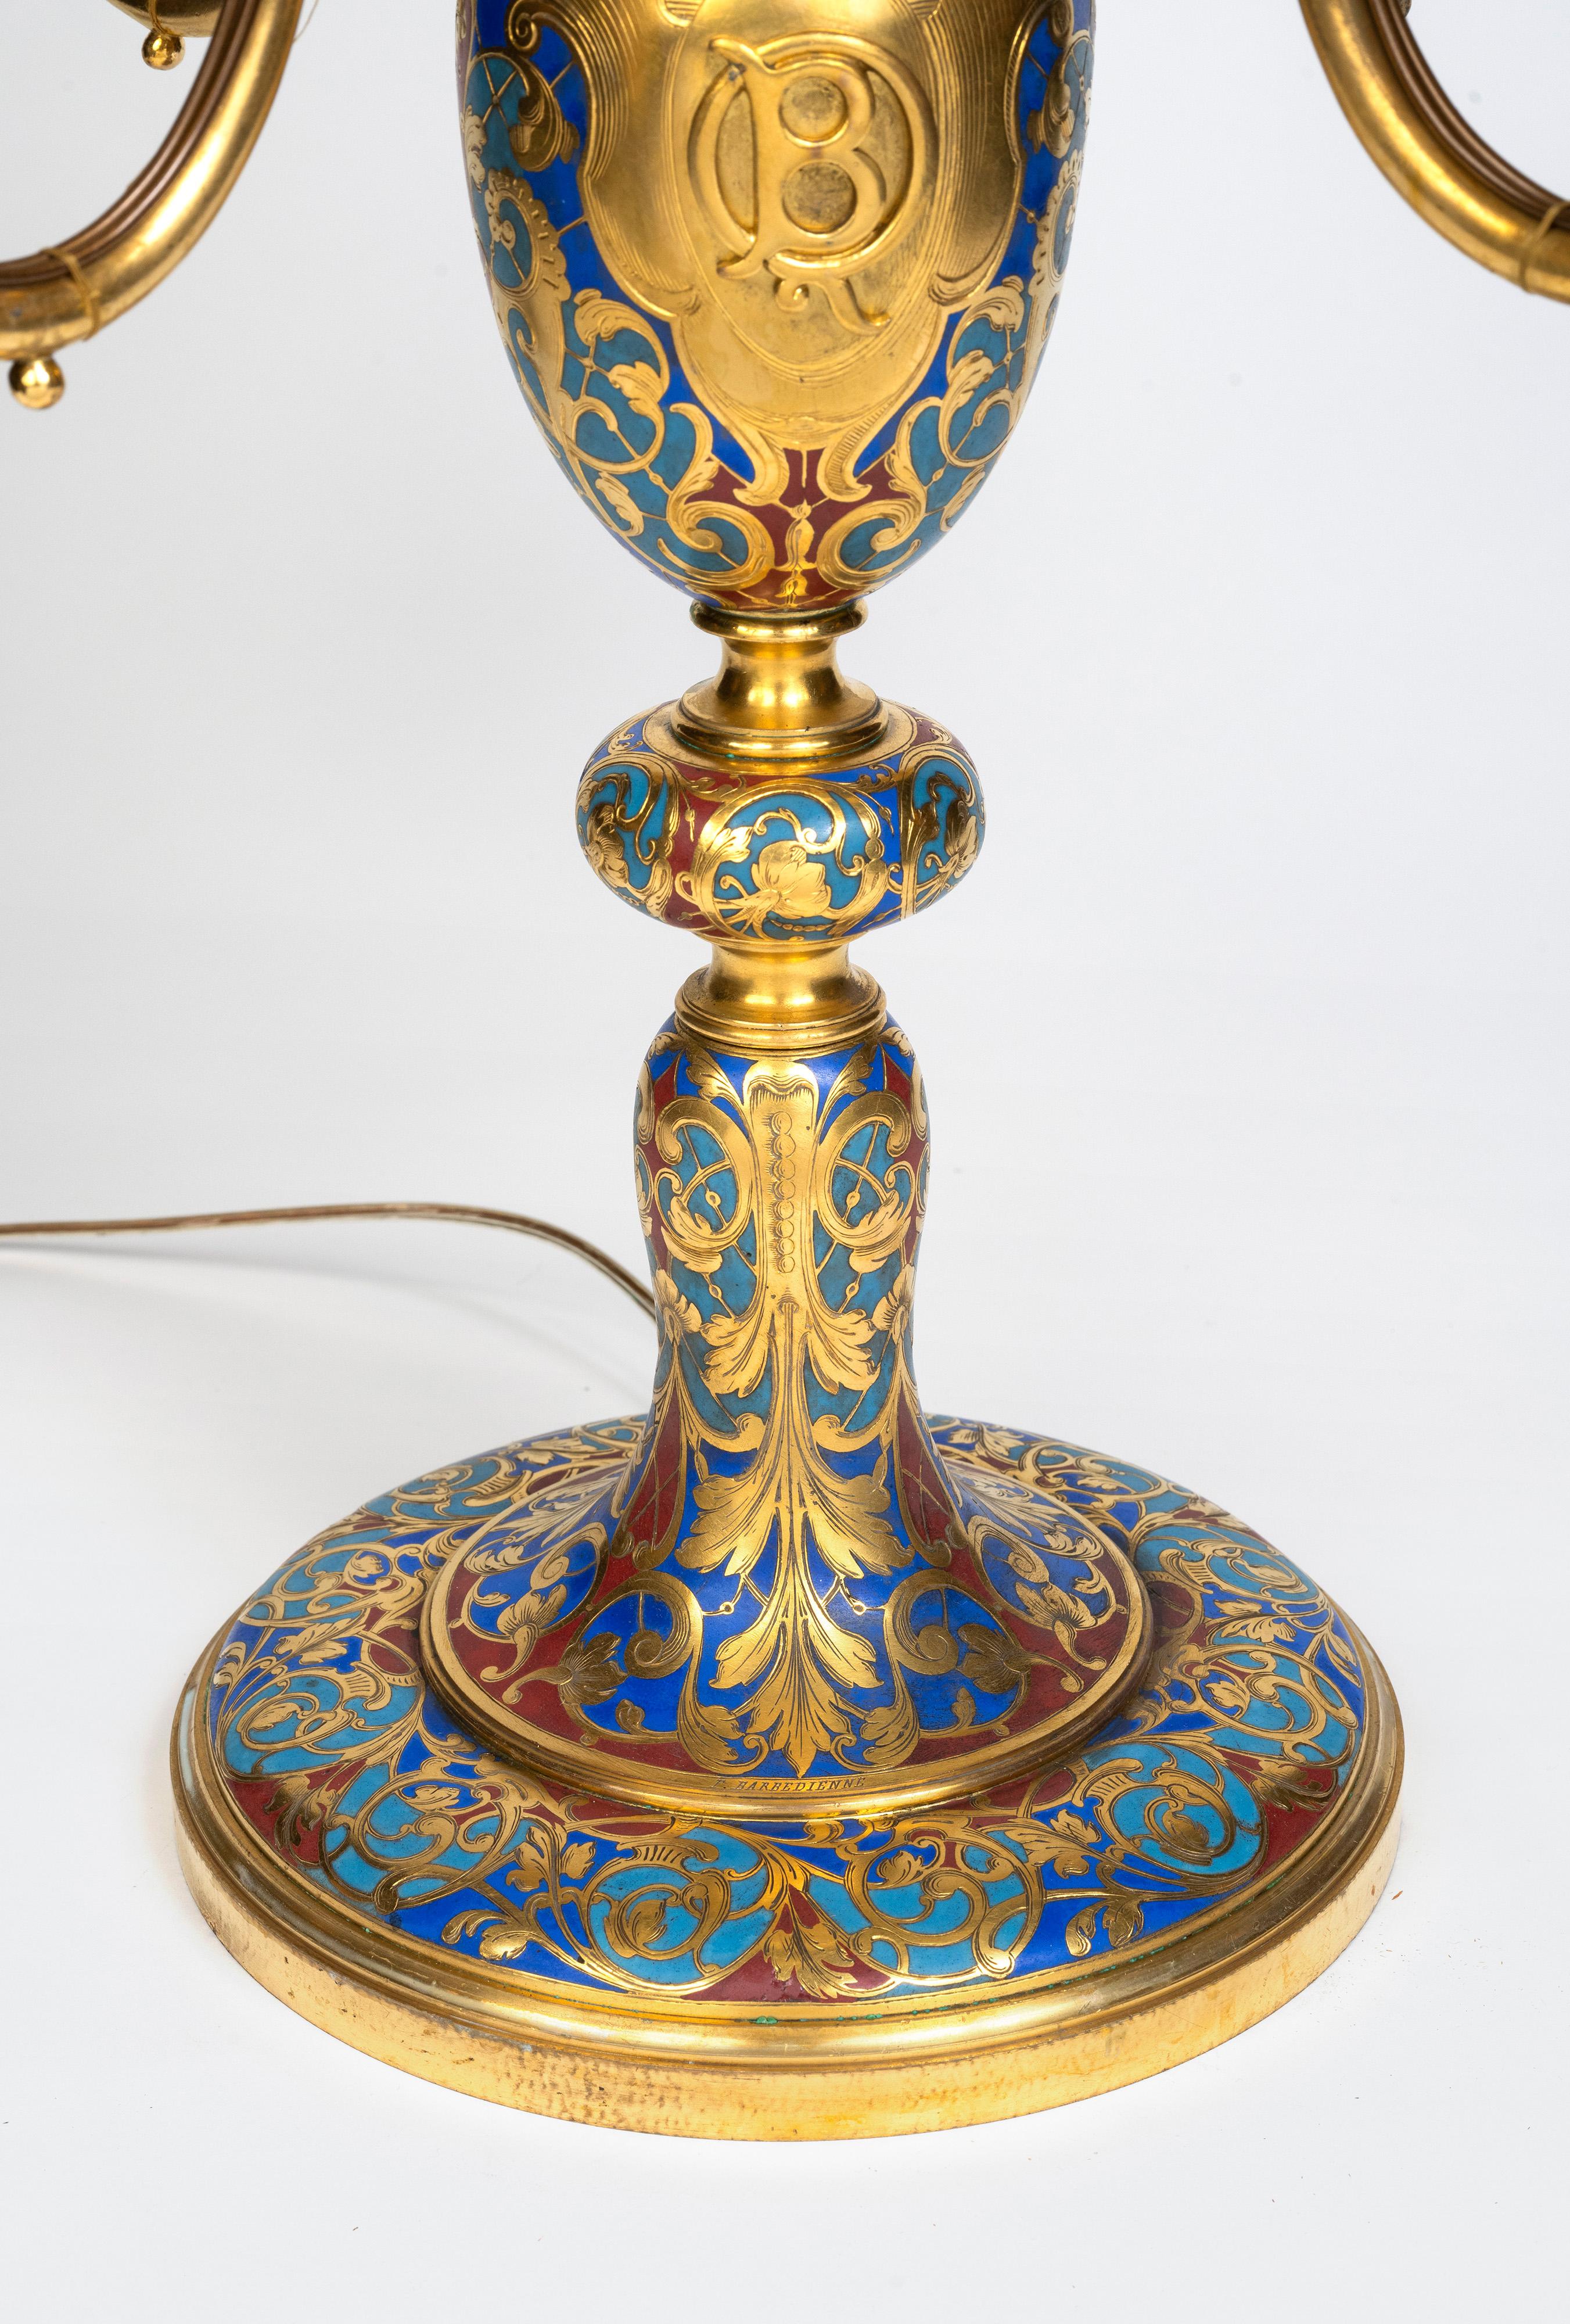 19th Century An Exceptional Pair of Champleve Enamel Ormolu Candelabra by Sevin & Barbedienne For Sale